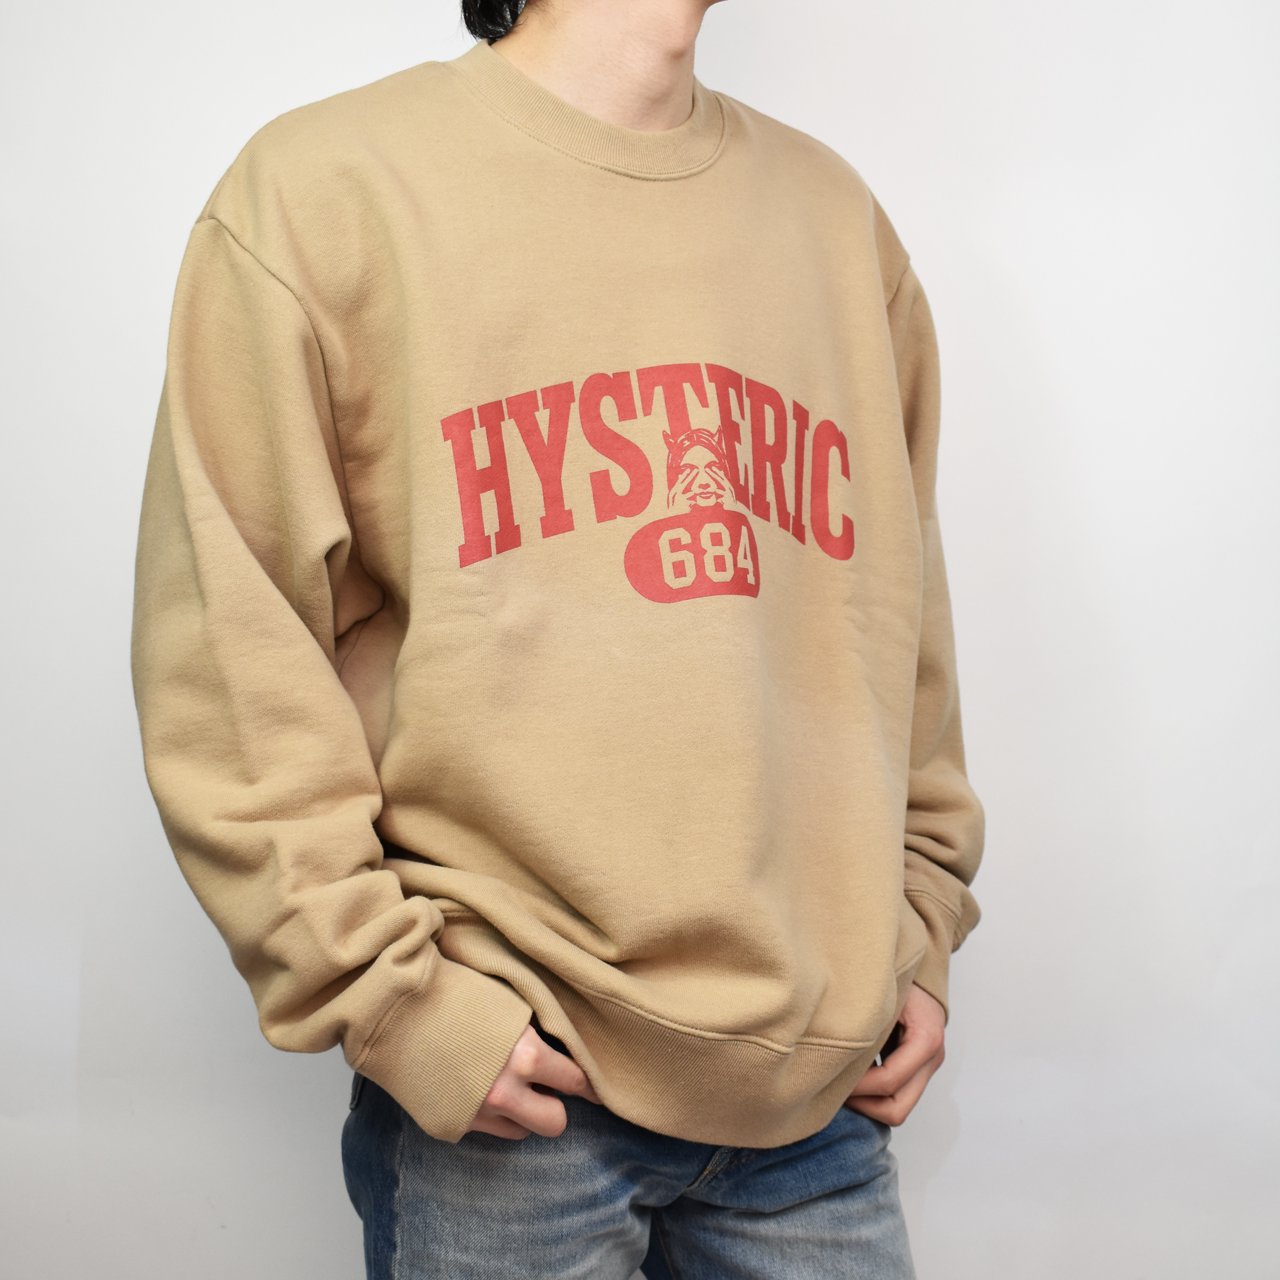 <img class='new_mark_img1' src='https://img.shop-pro.jp/img/new/icons5.gif' style='border:none;display:inline;margin:0px;padding:0px;width:auto;' />HYSTERIC GLAMOUR (ヒステリックグラマー)｜EVIL COLLEGE スウェット ベージュ